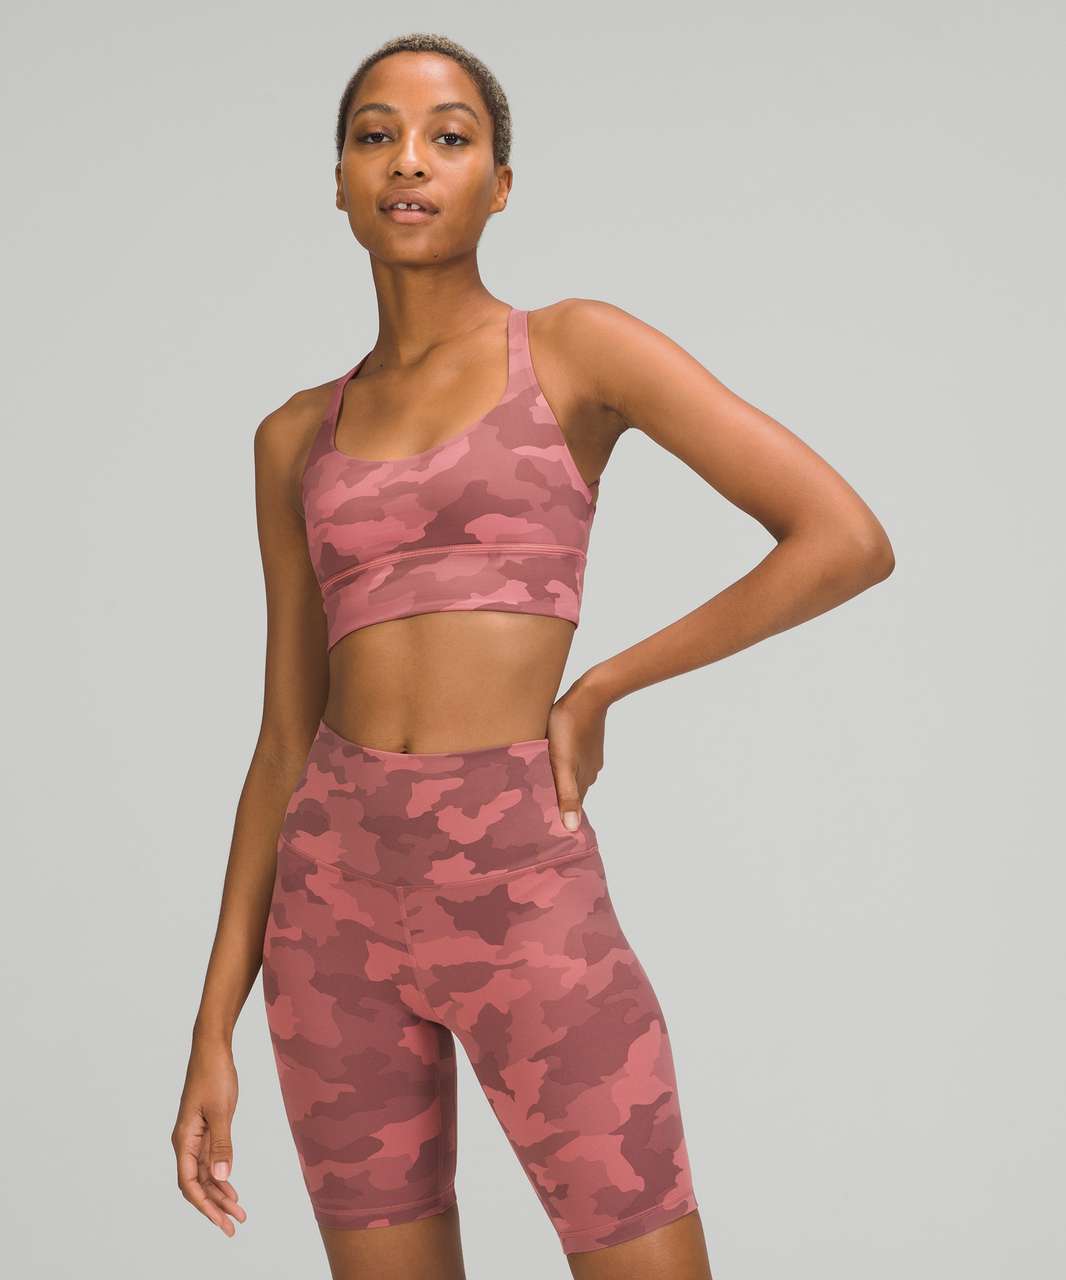 Lululemon Free to Be Long-Line Bra - Wild *Light Support, A/B Cups - Heritage 365 Camo Brier Rose Multi